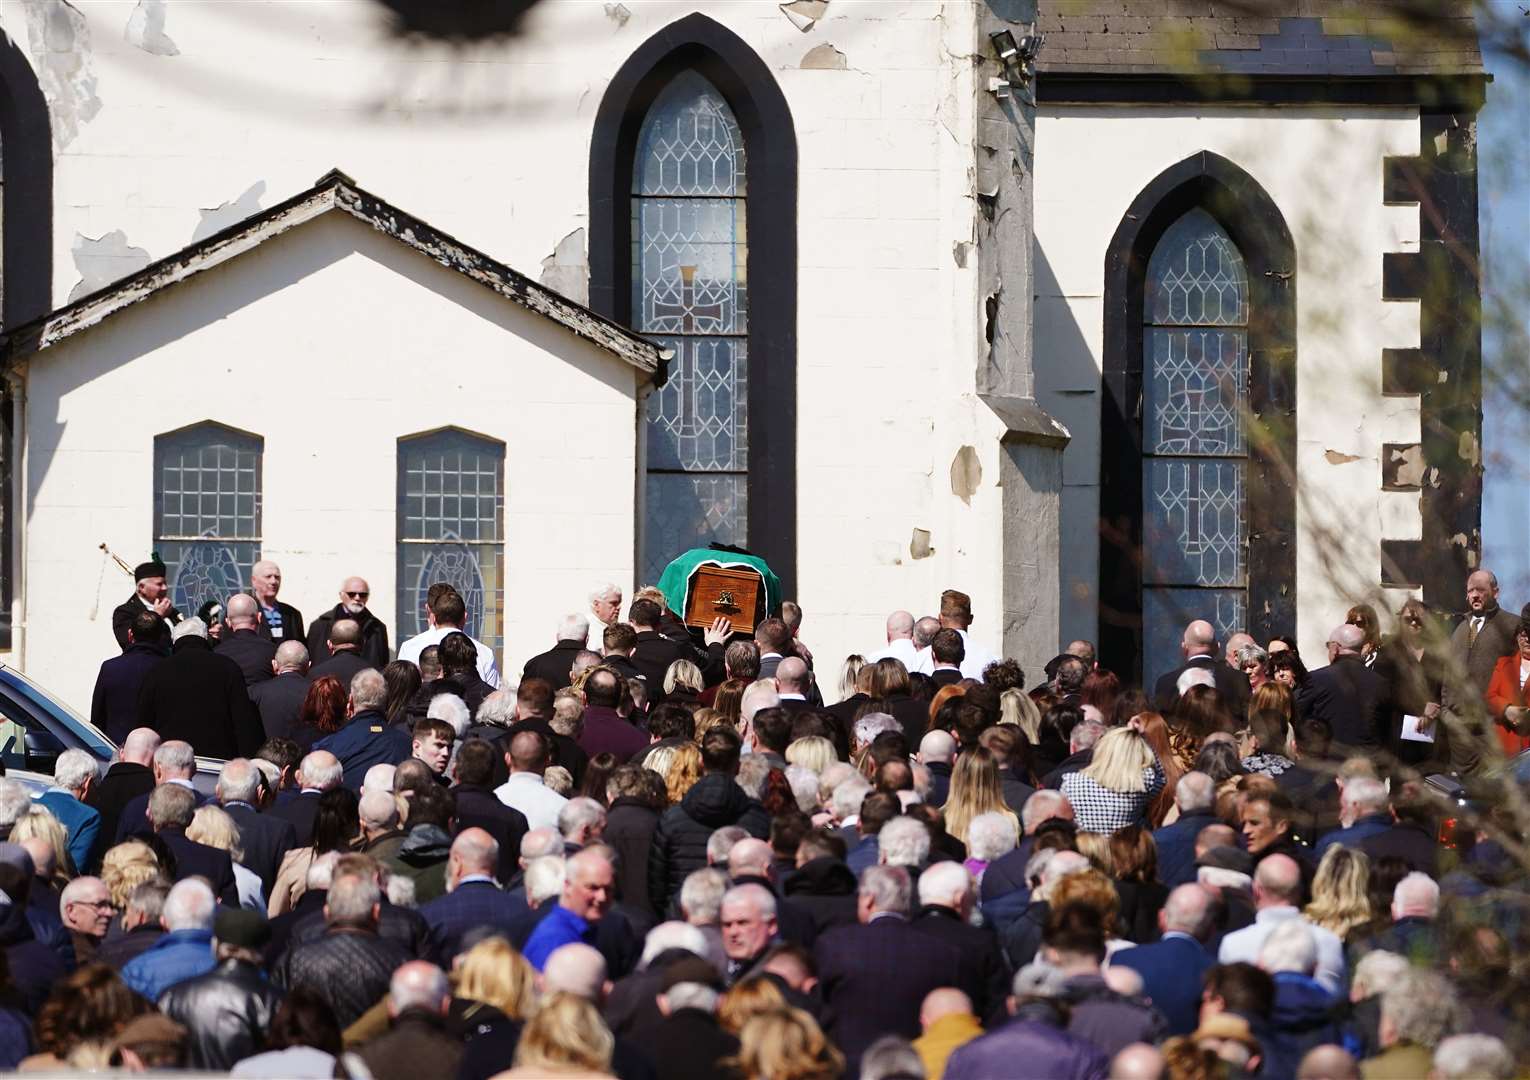 The coffin of Colm Murphy, who was found liable in a civil case for the 1998 Omagh bombing, is carried to the Church of St Laurence O’Toole, Belleeks, Co Armagh (Brian Lawless/PA)